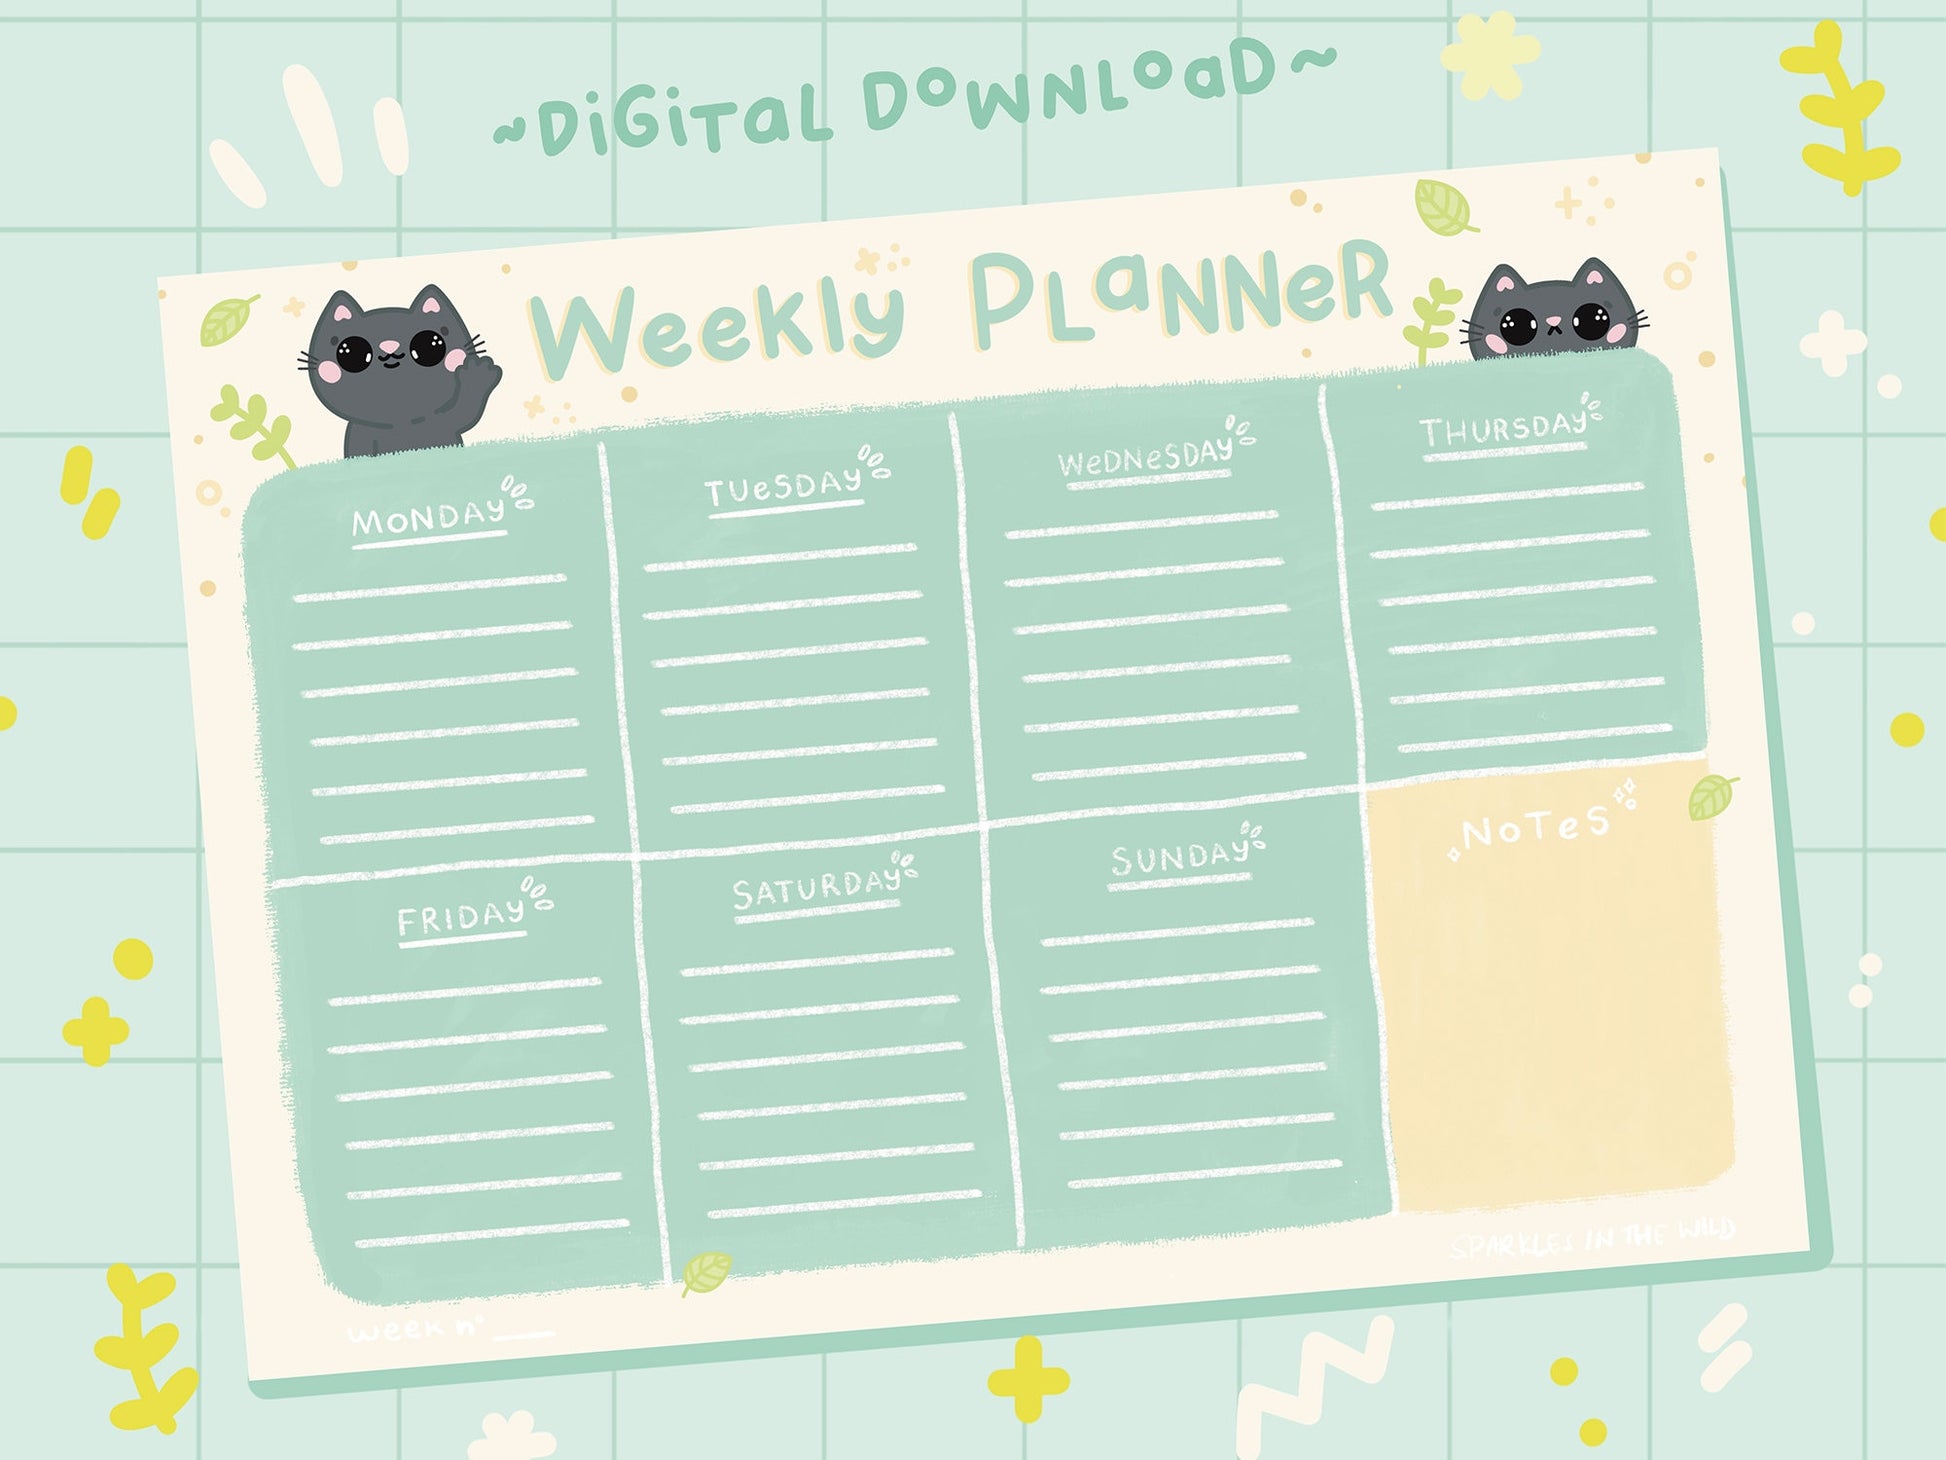 Weekly planner printable cute with cat, A4 sheet to download and print at home